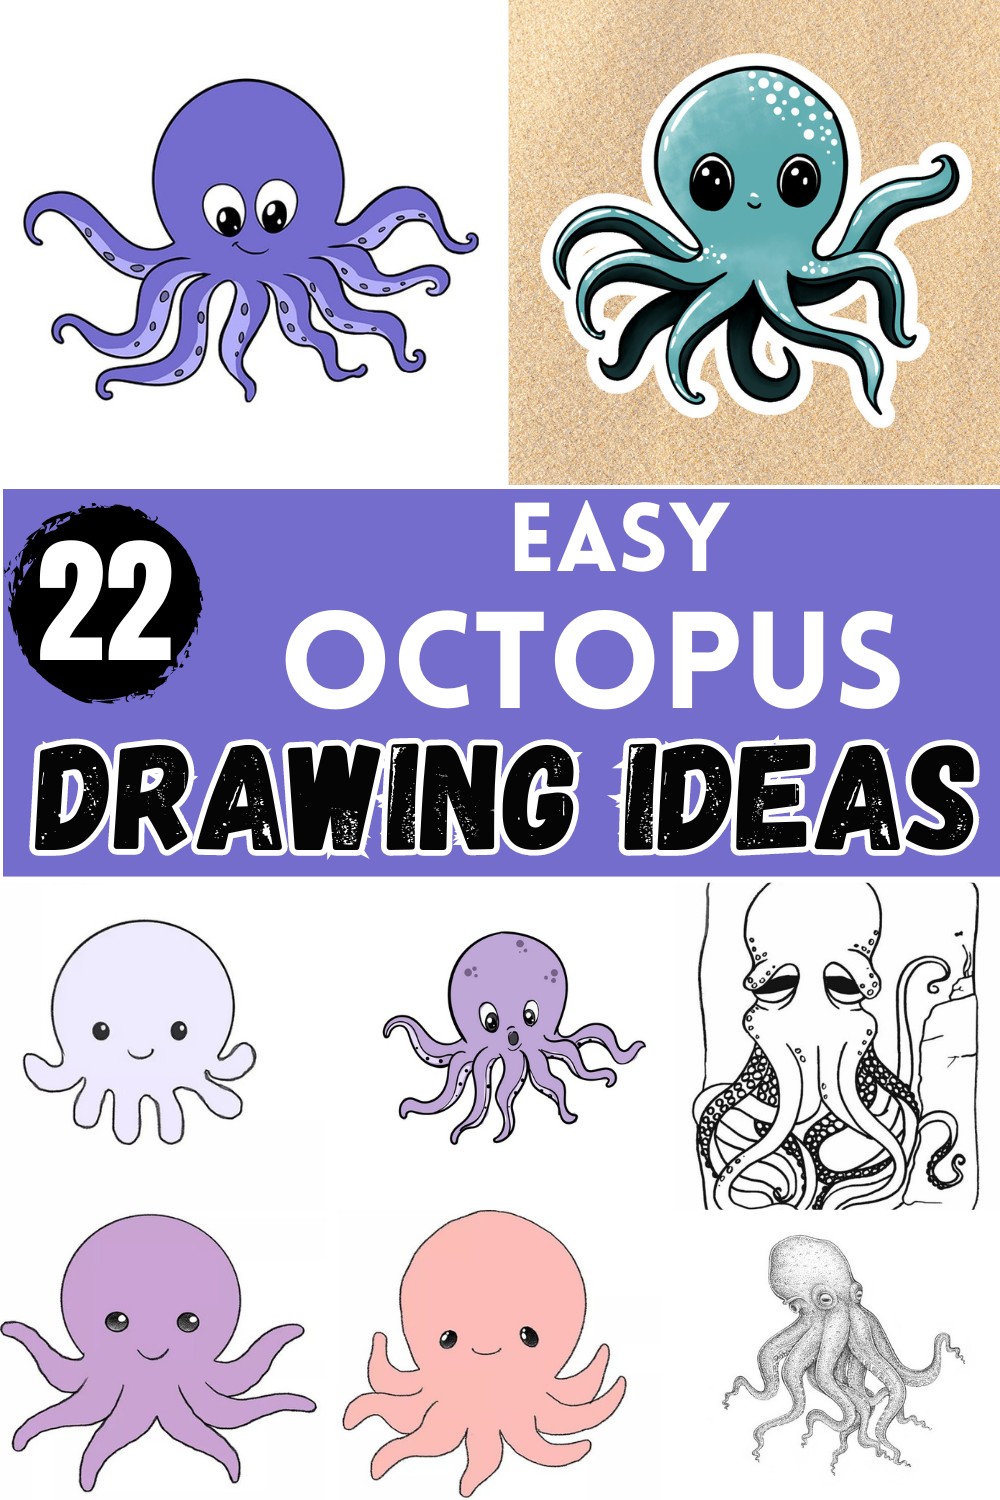 Easy Octopus Drawing Ideas